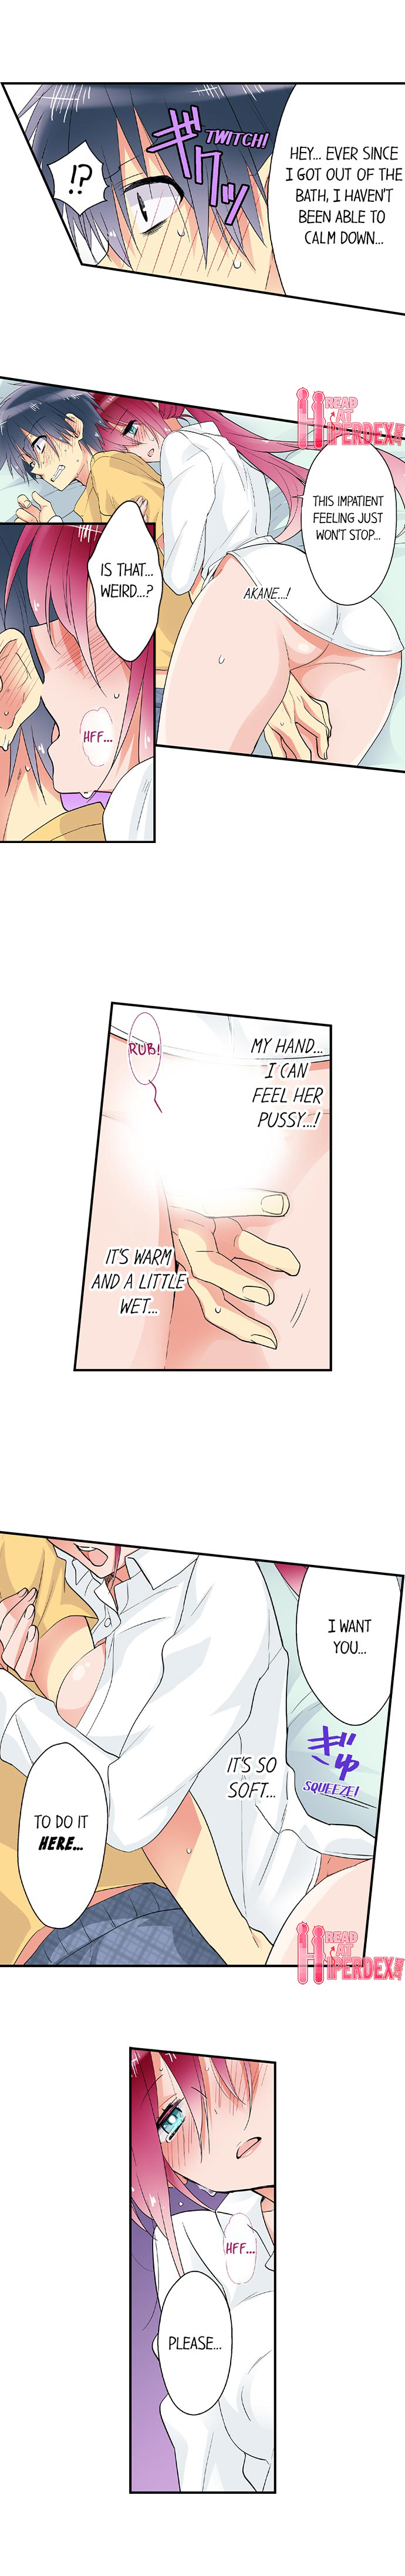 Teaching Sex to My Amnesiac Sister - Chapter 4 Page 8